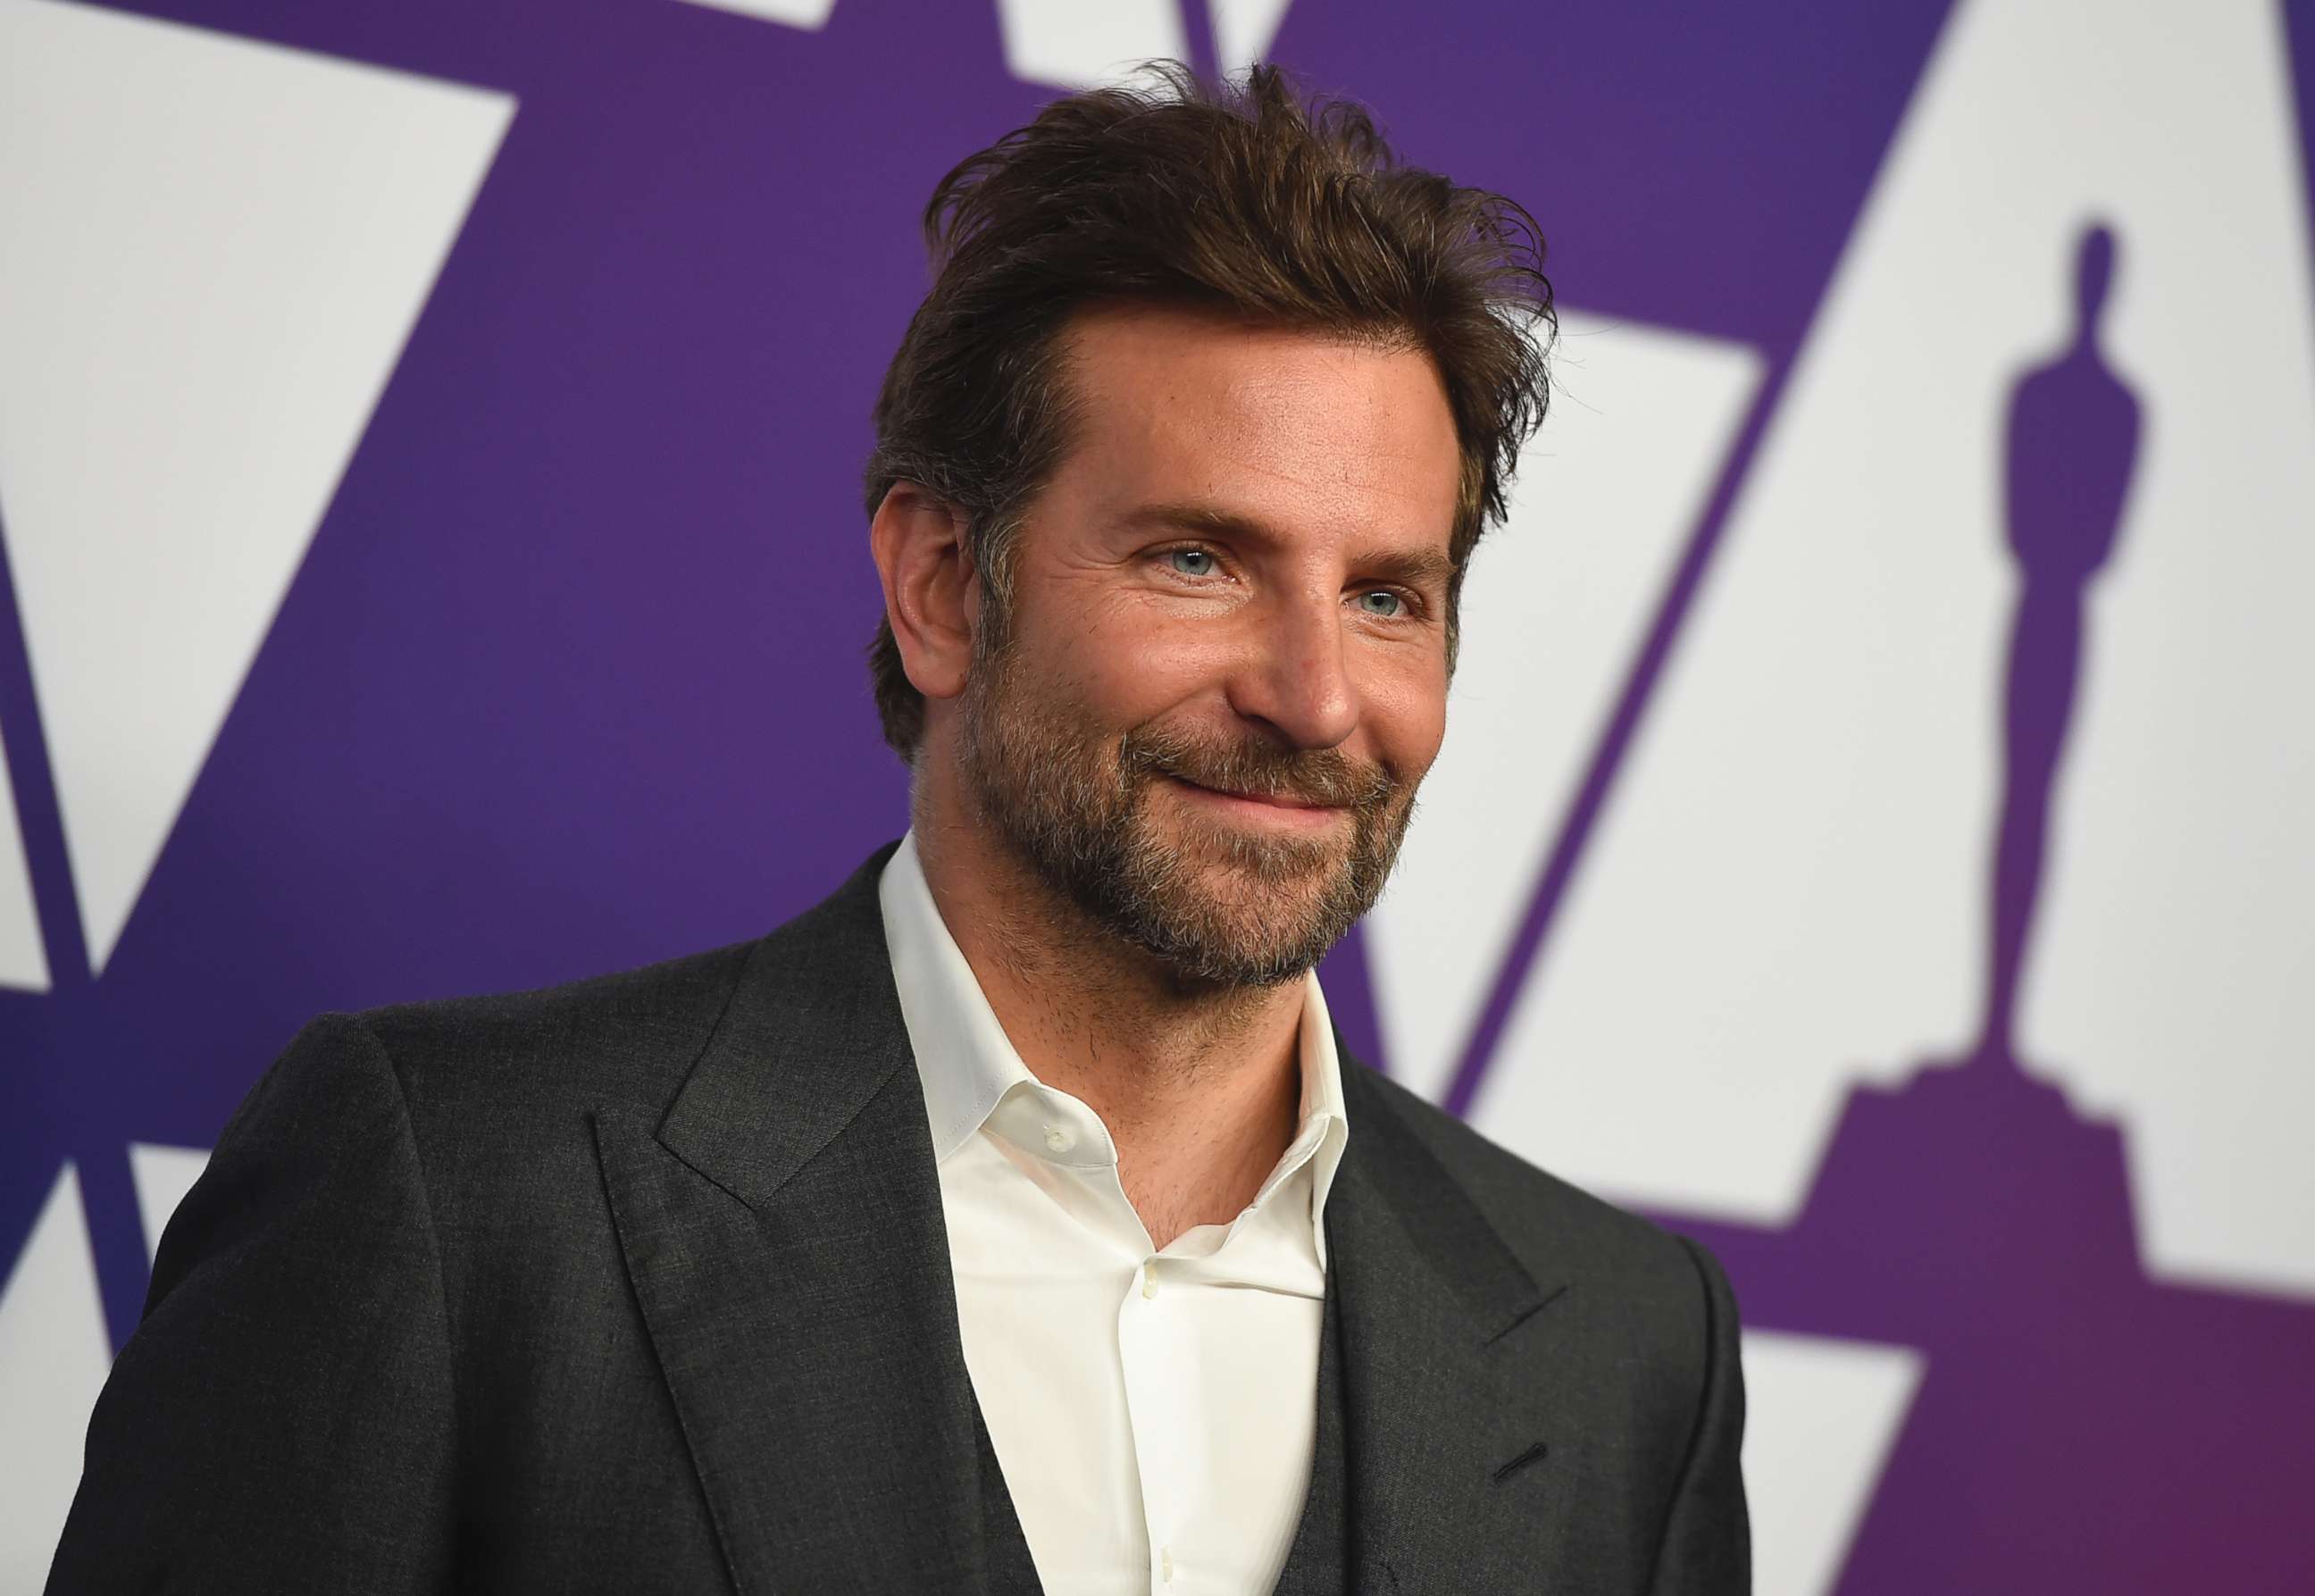 PHOTO: Bradley Cooper arrives at the 91st Academy Awards Nominees Luncheon, Feb. 4, 2019, at The Beverly Hilton Hotel in Beverly Hills, Calif. 